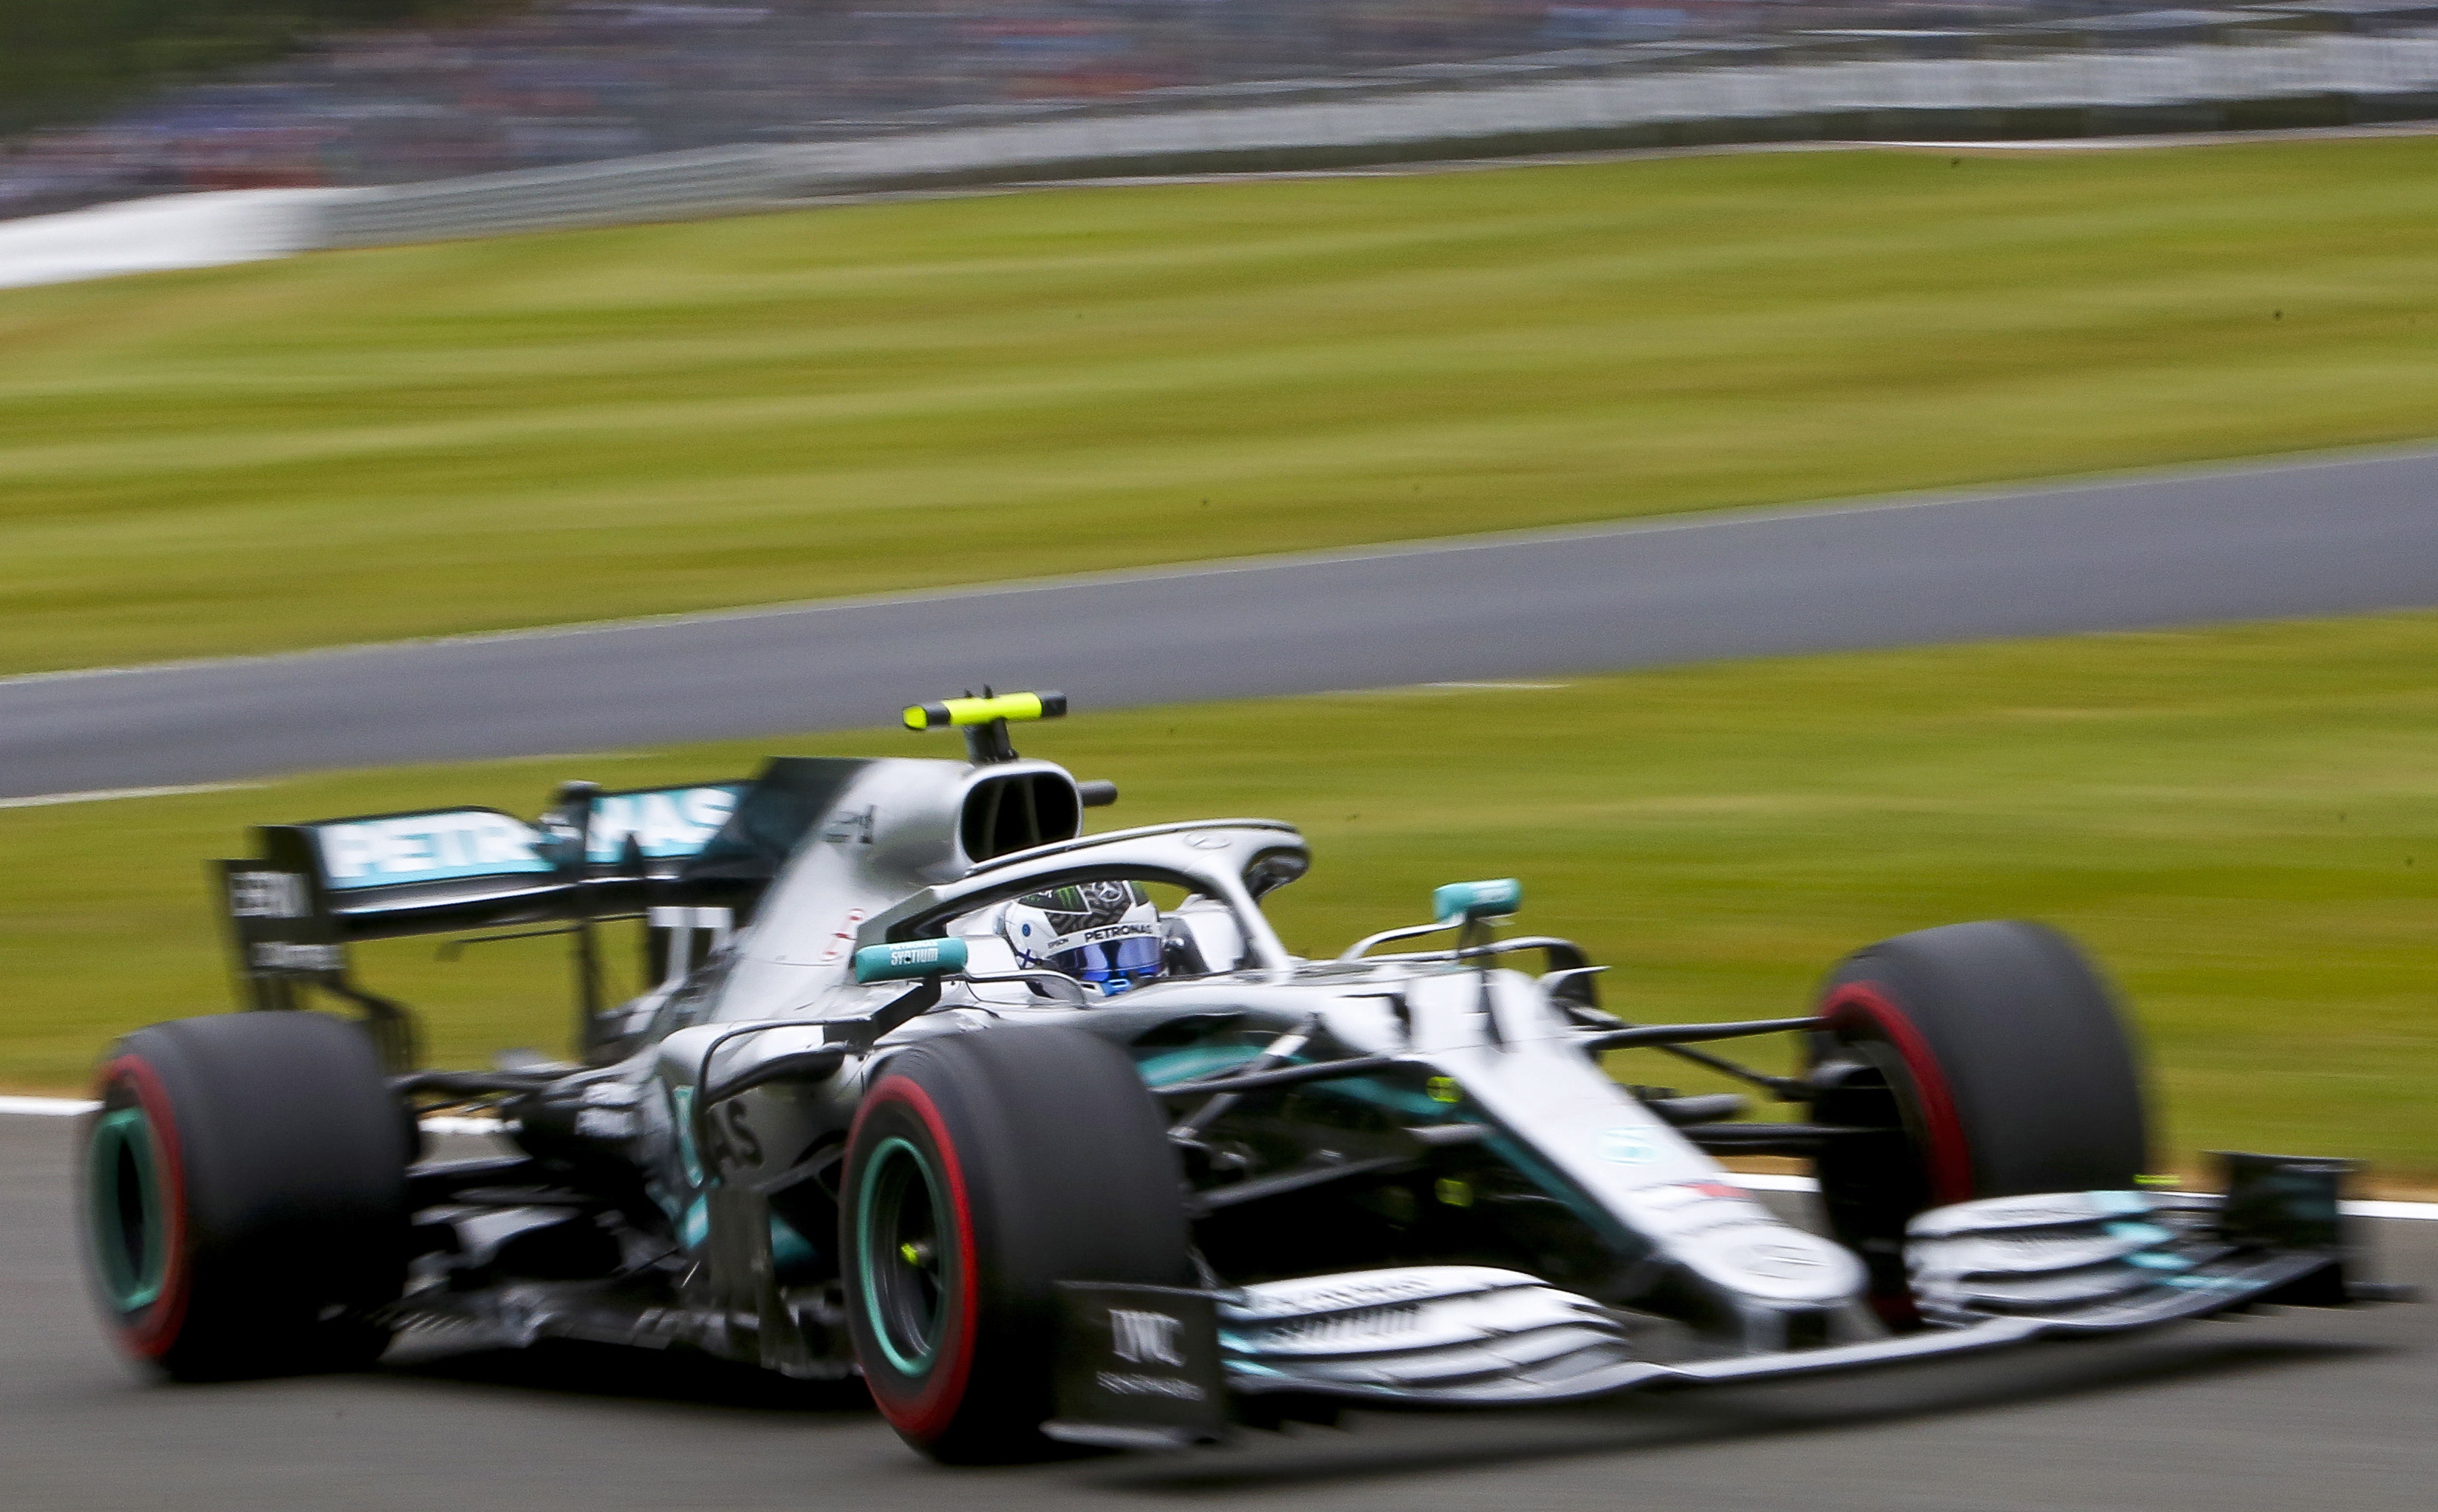 epa07714252 Finnish Formula One driver Valtteri Bottas of Mercedes AMG GP during the third practice session of the Formula One Grand Prix of Great Britain at the Silverstone circuit, in Northamptonshire, Britain, 13 July 2019. The 2018 Formula One Grand Prix of Great Britain will take place on 14 July.  EPA/GEOFF CADDICK